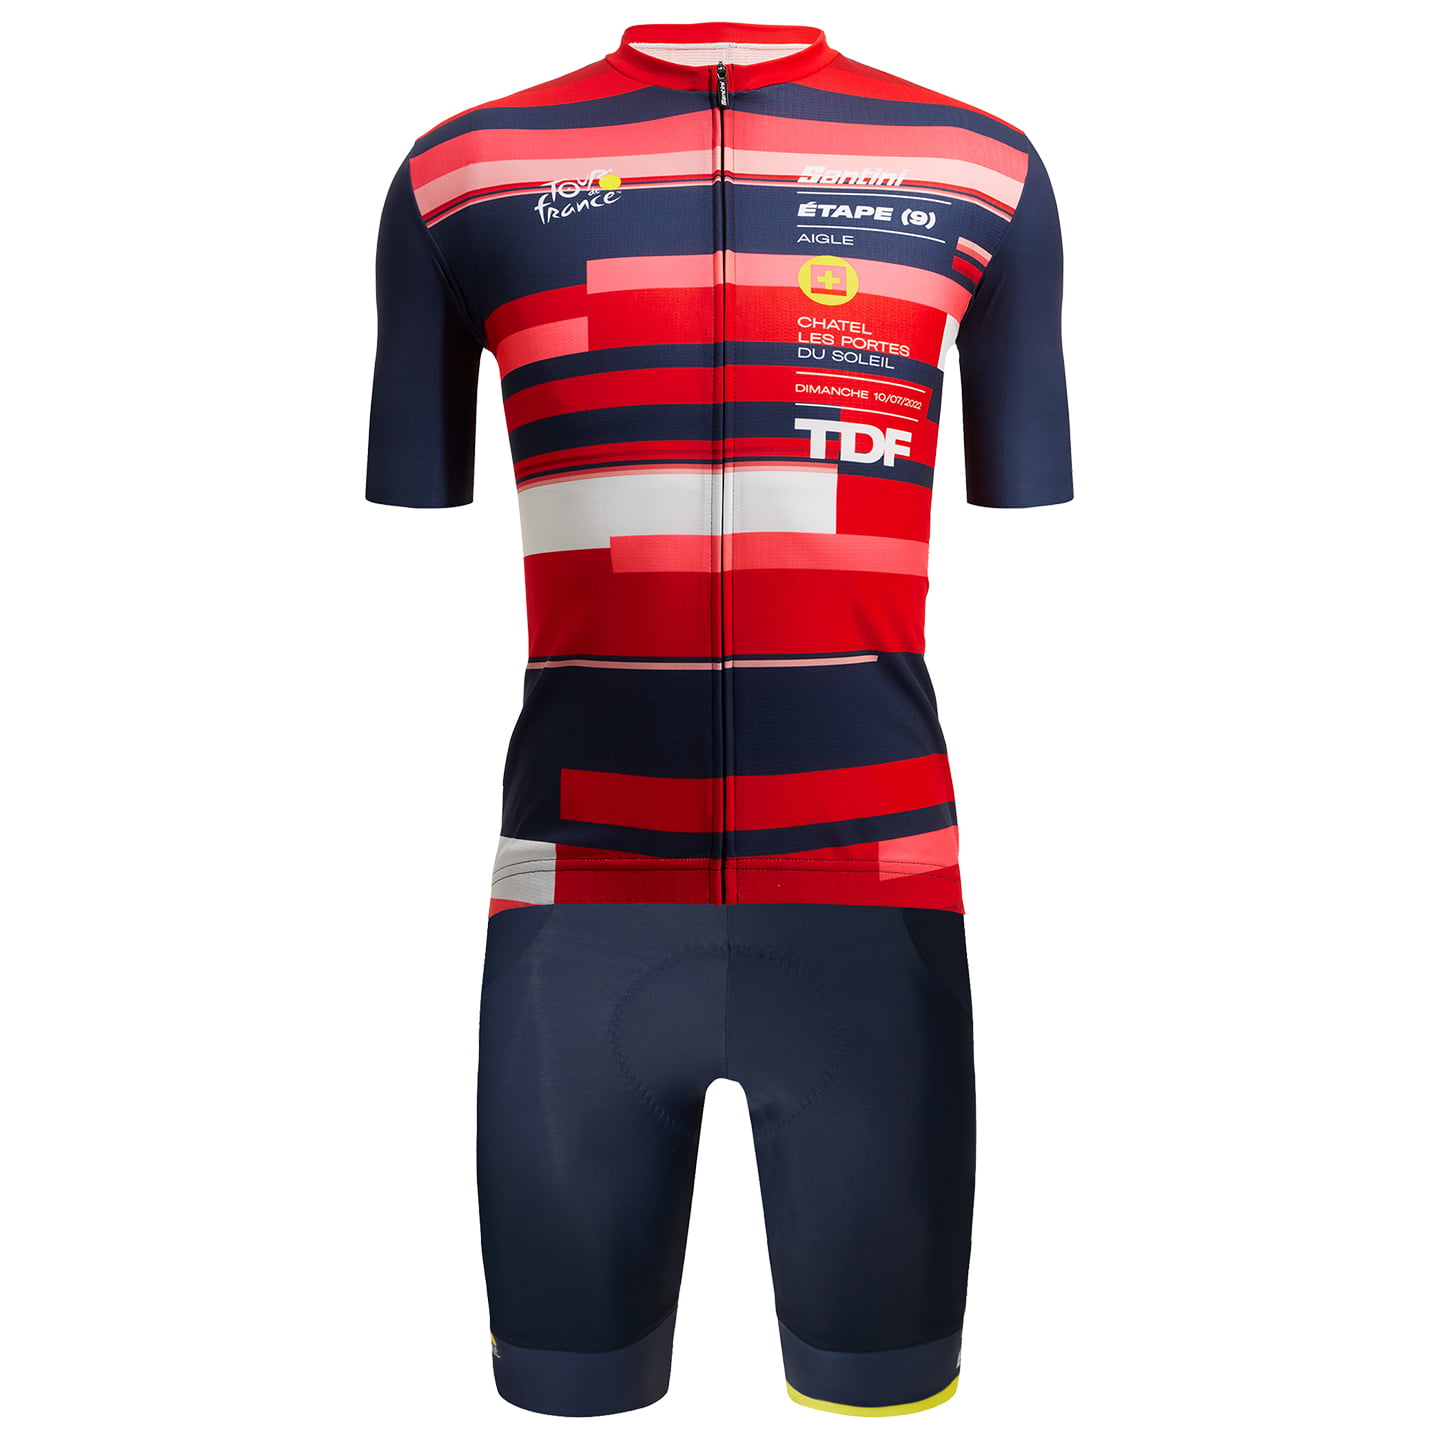 TOUR DE FRANCE Aigle-Chatel 2022 Set (cycling jersey + cycling shorts) Set (2 pieces), for men, Cycling clothing